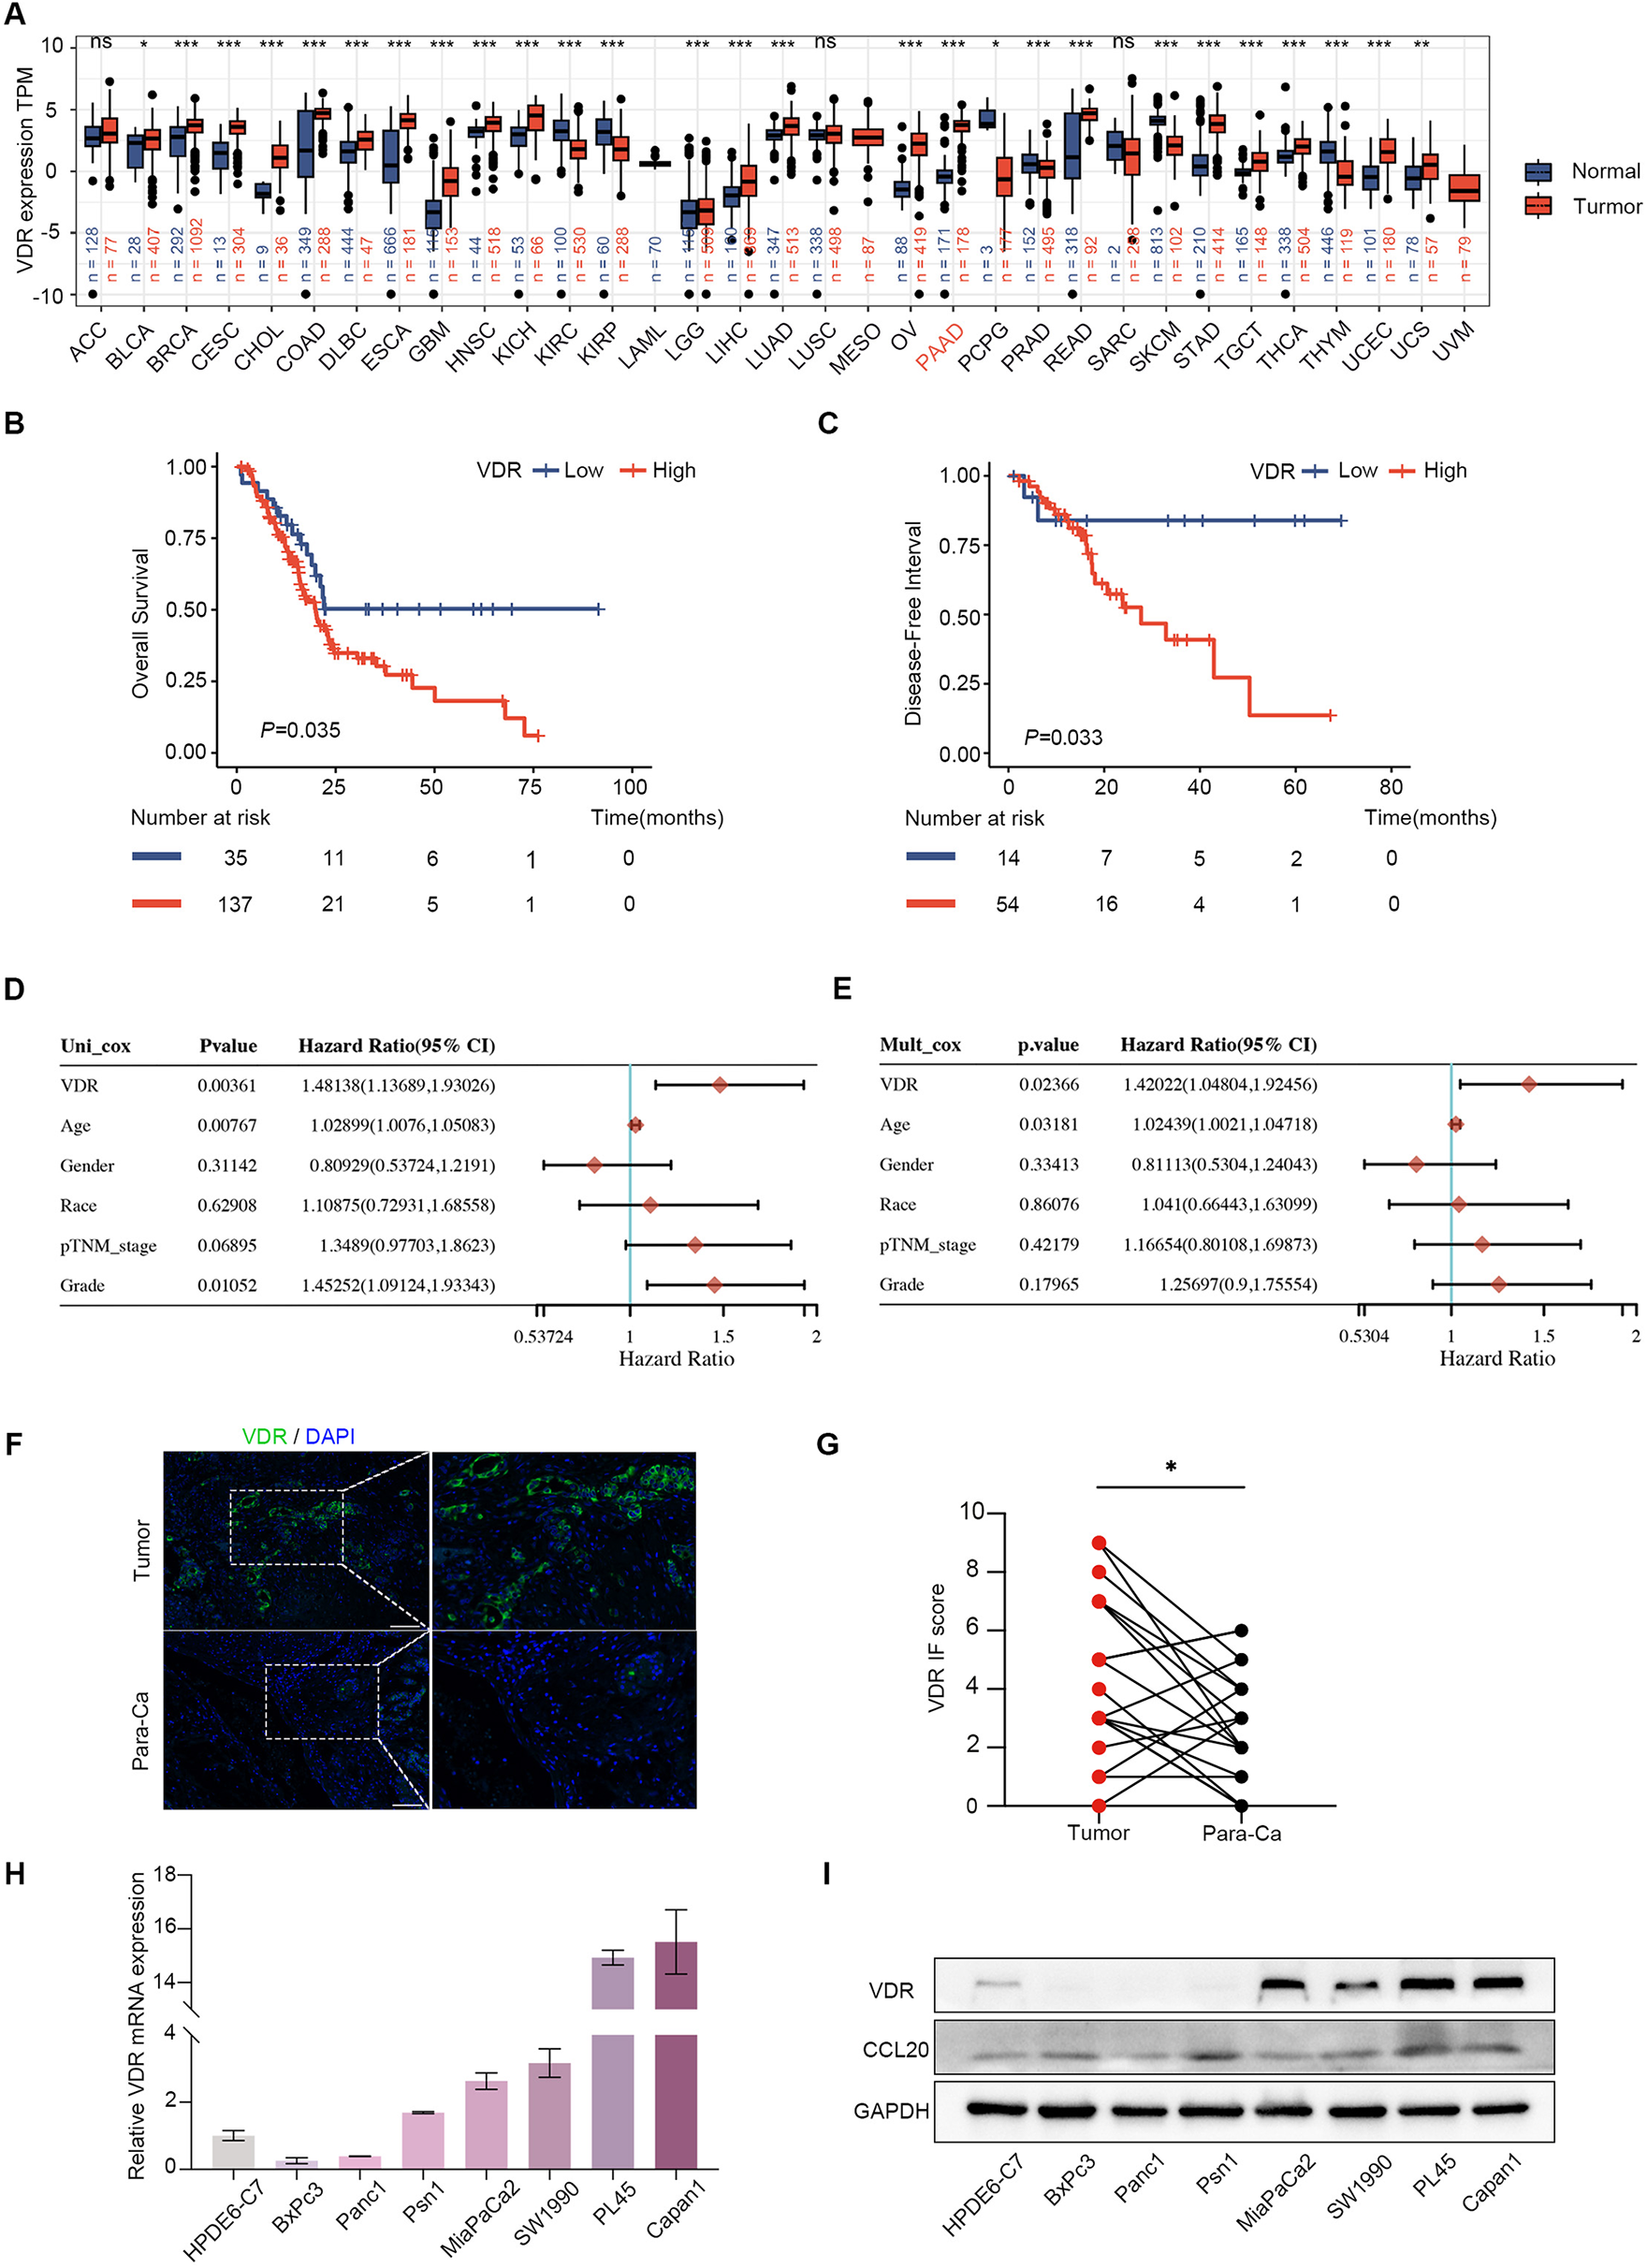 VDR promotes pancreatic cancer progression in vivo by activating CCL20-mediated M2 polarization of tumor associated macrophage